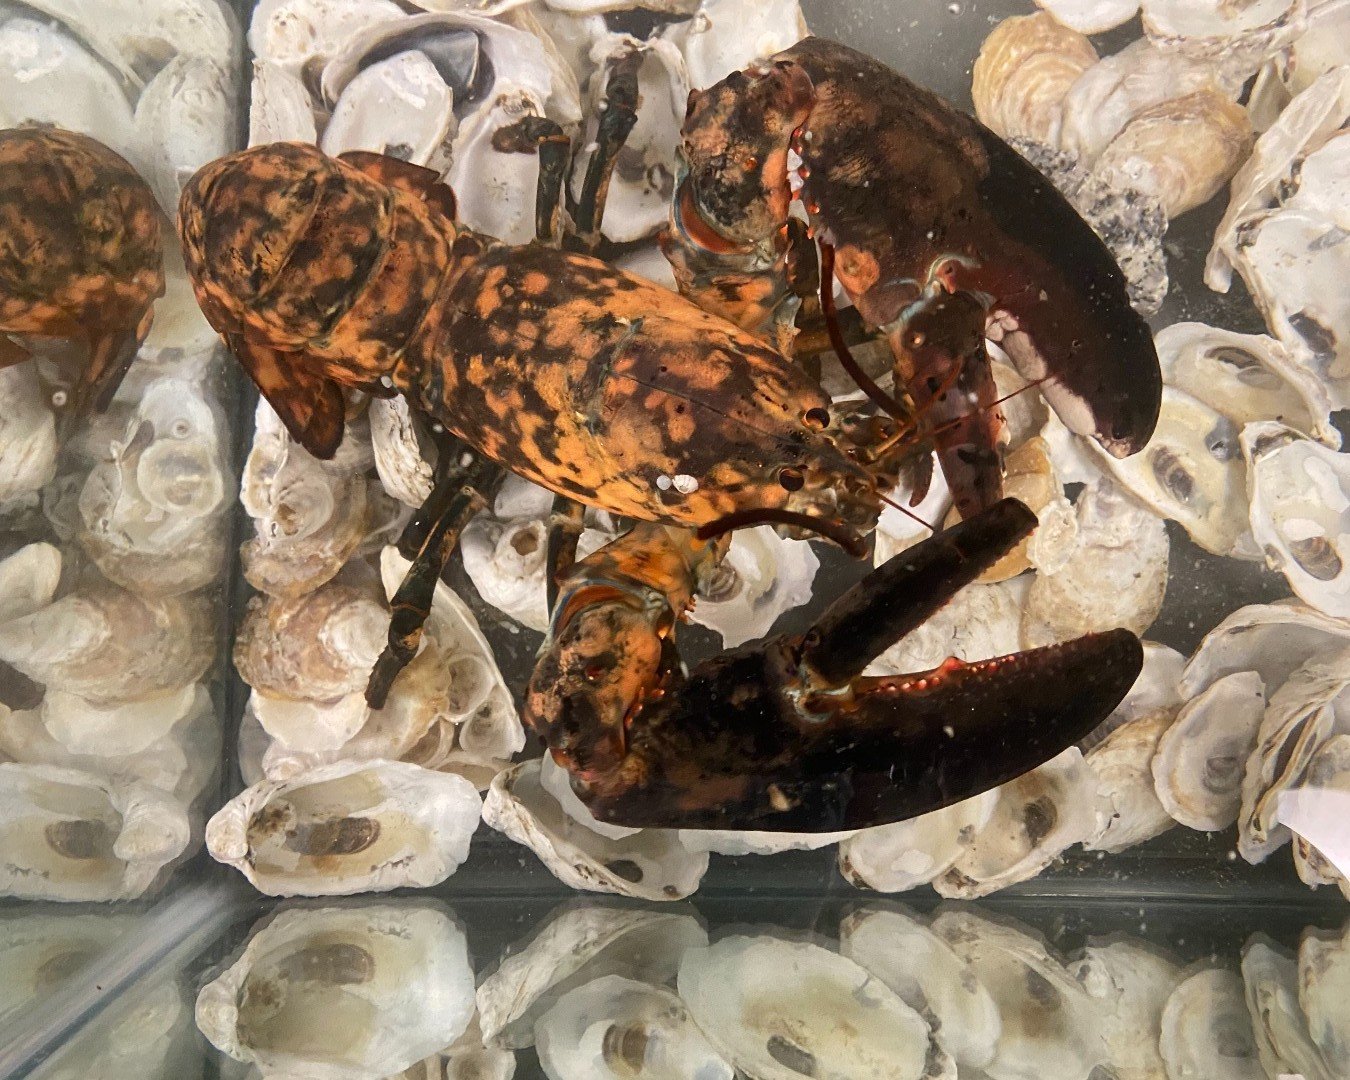 Rare Calico Lobster Turns Heads, And Escapes Dinner Menu : The Two-Way : NPR